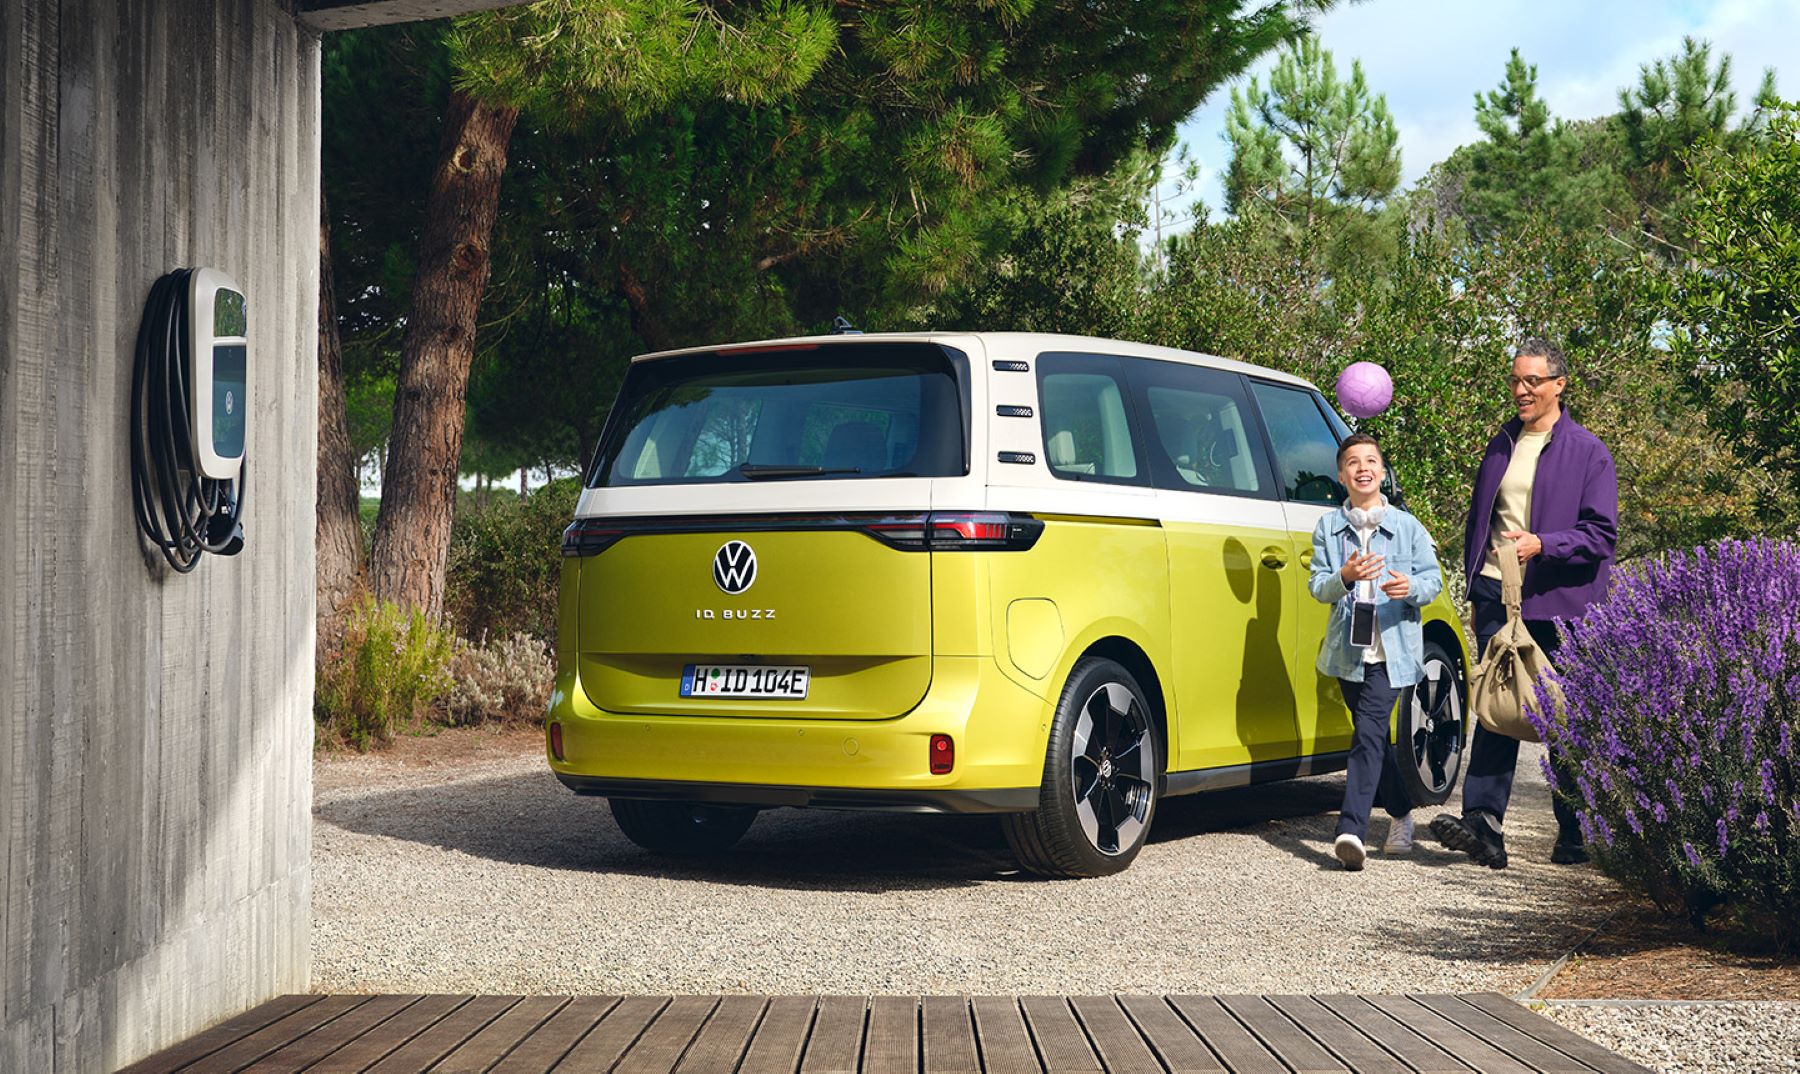 A yellow Volkswagen ID. Buzz all-electric microbus with an at-home EV charger